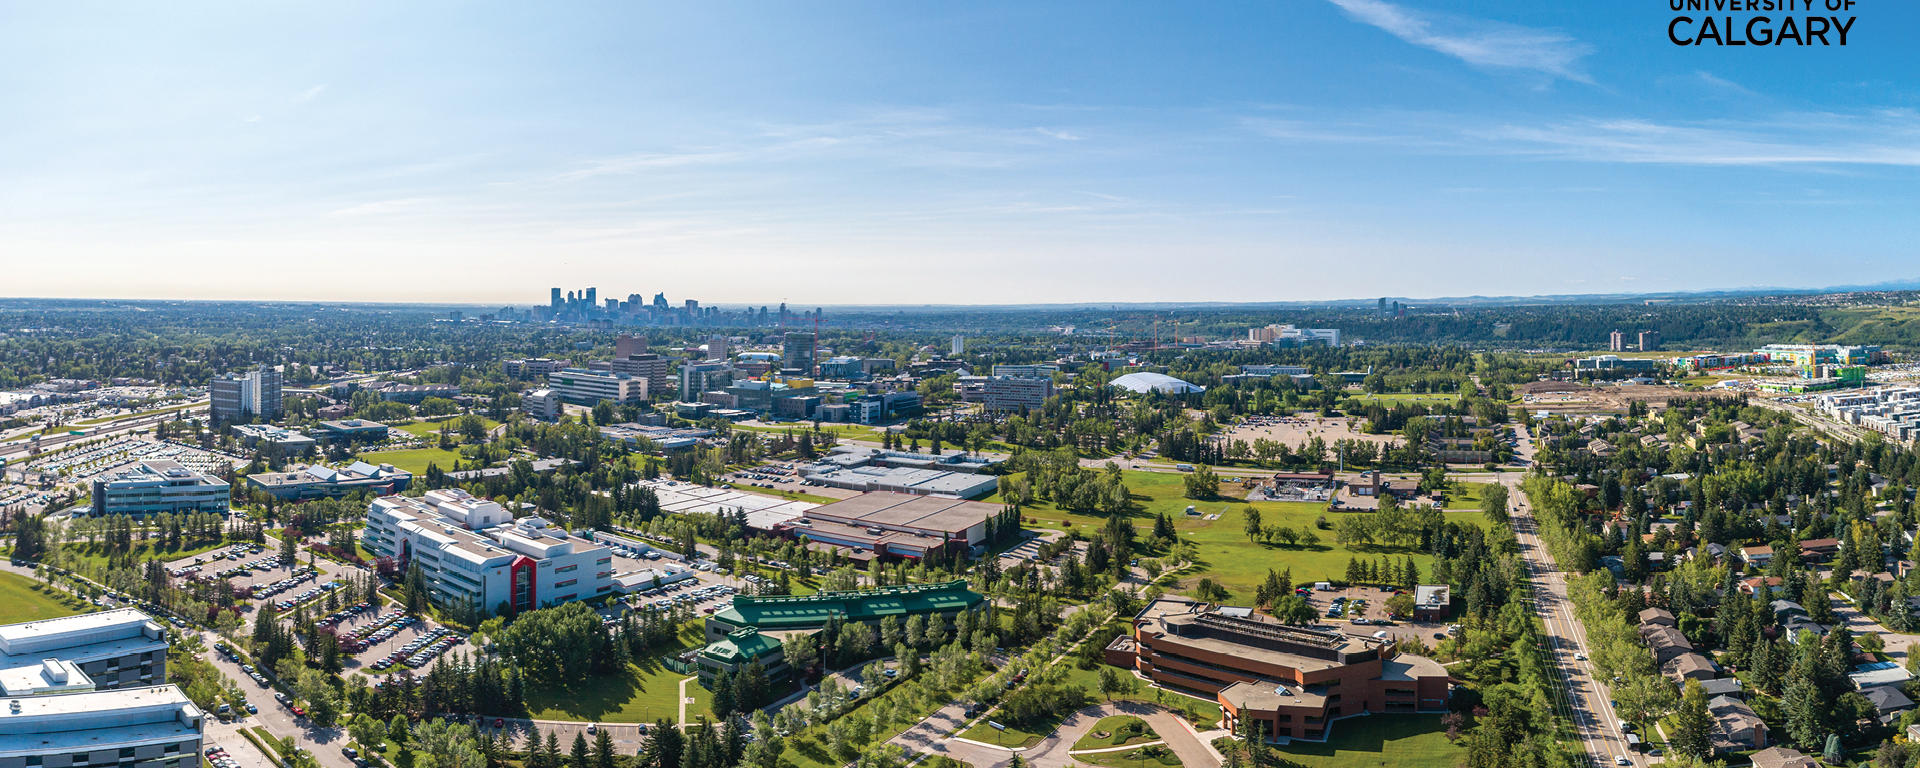 aerial view of University